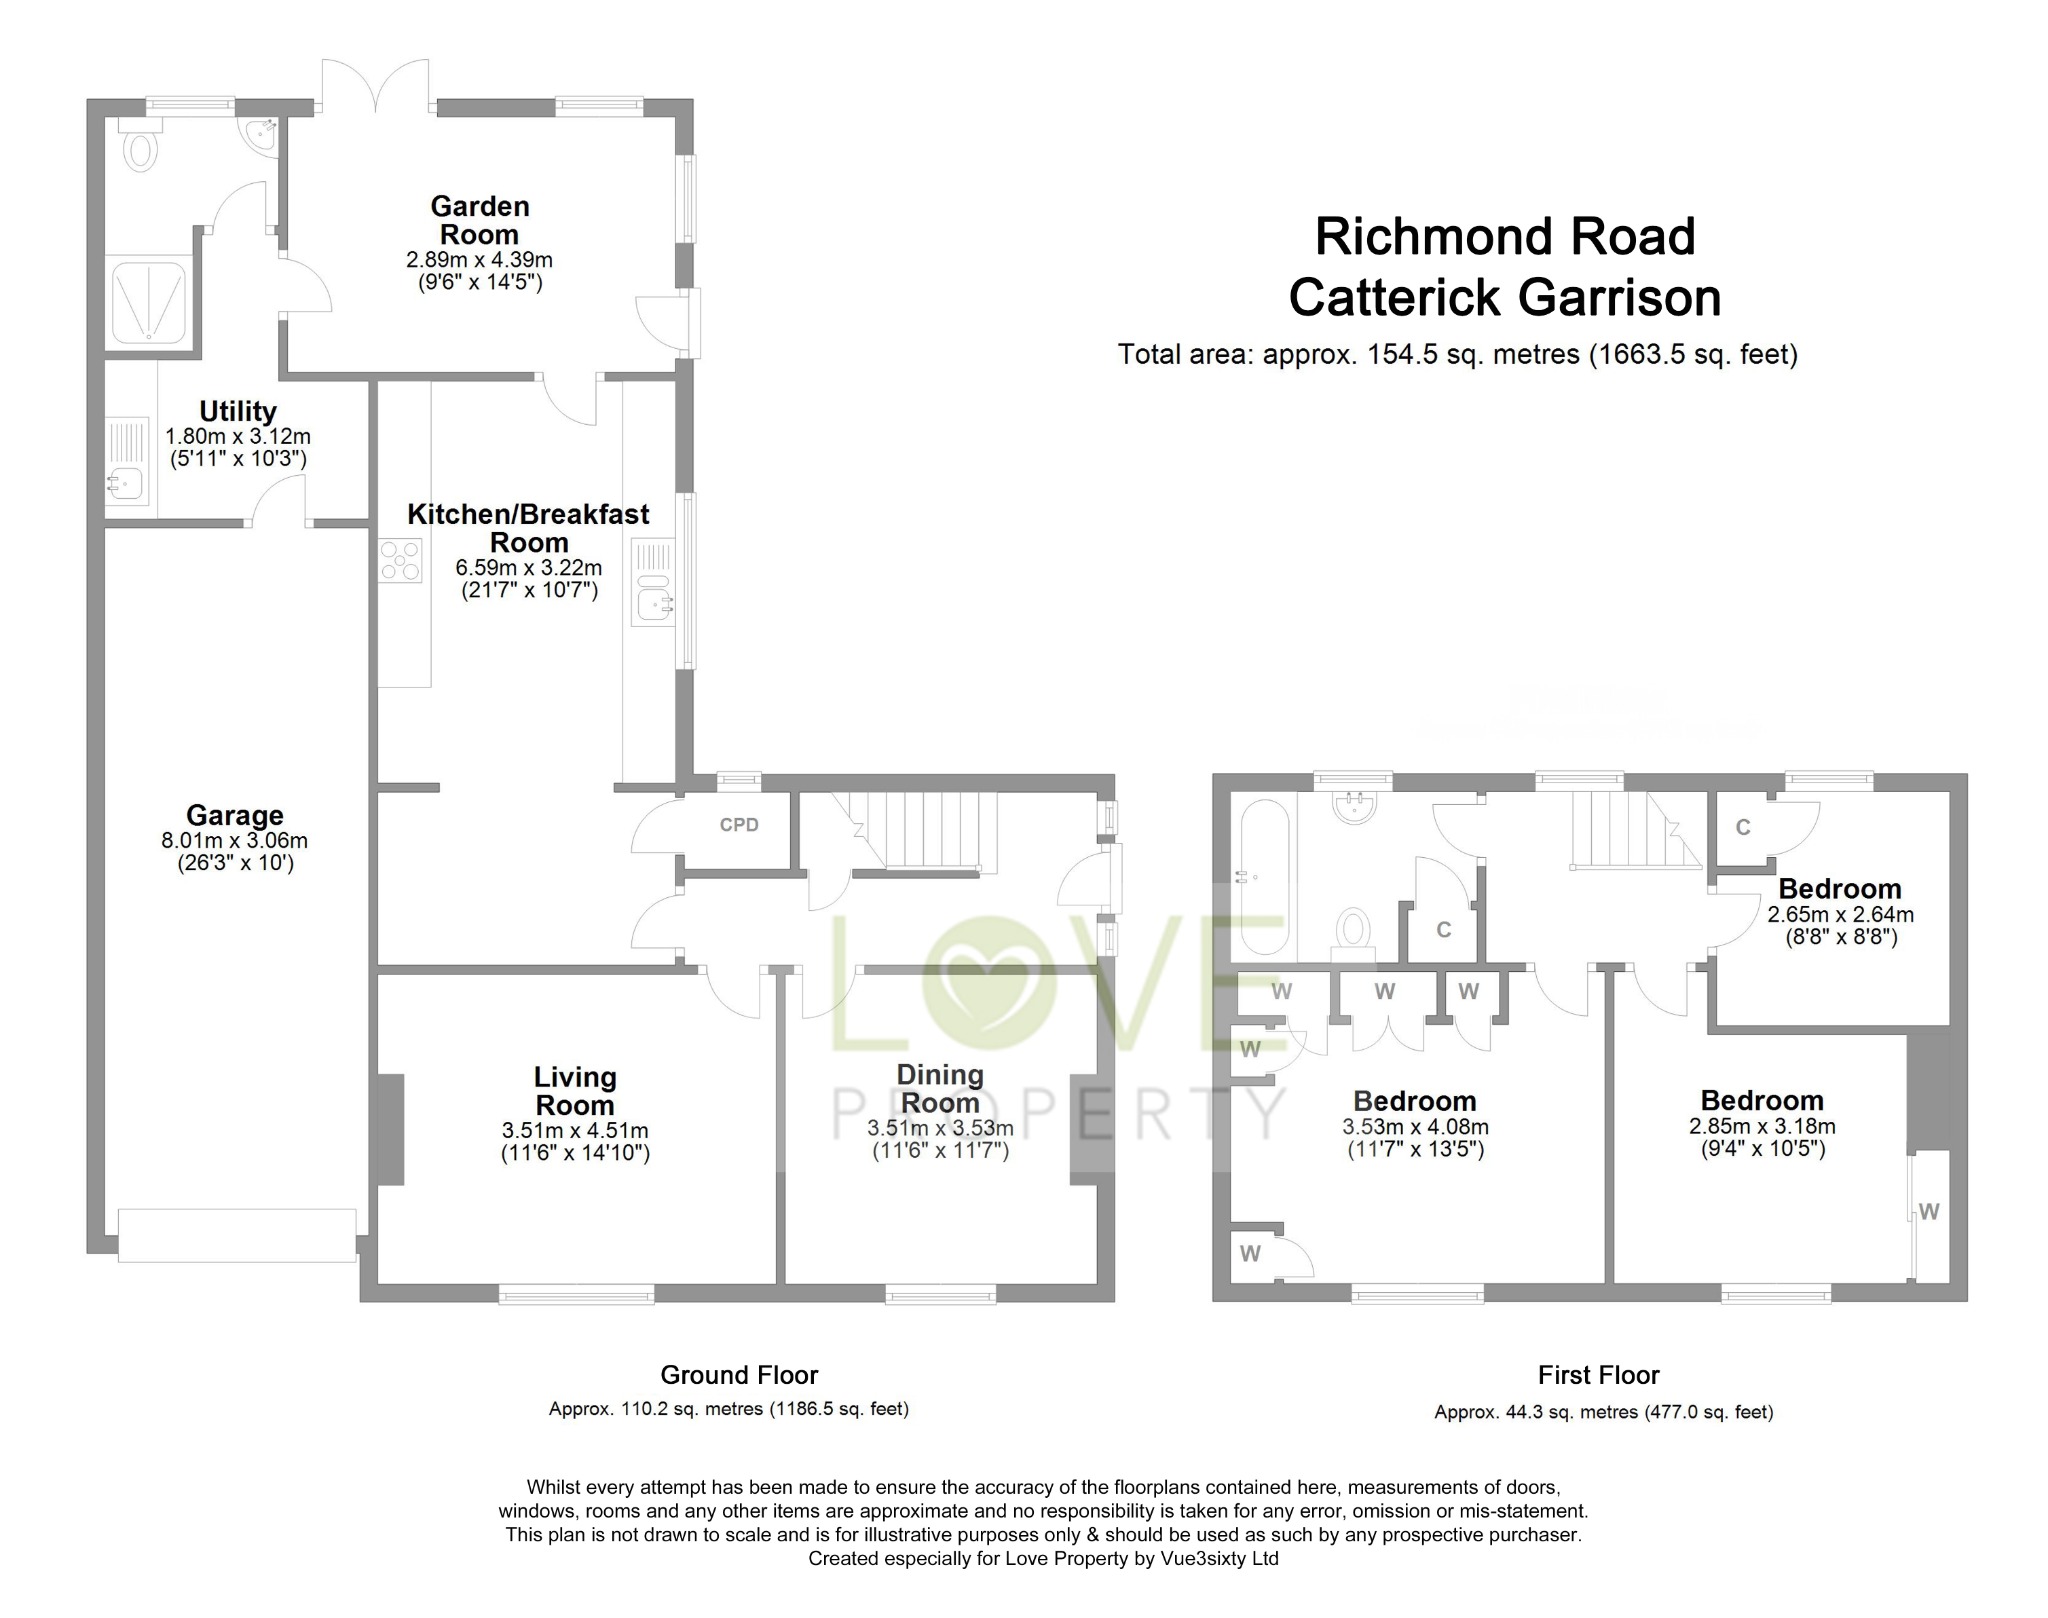 3 bed detached house for sale in Richmond Road, Catterick Garrison - Property floorplan